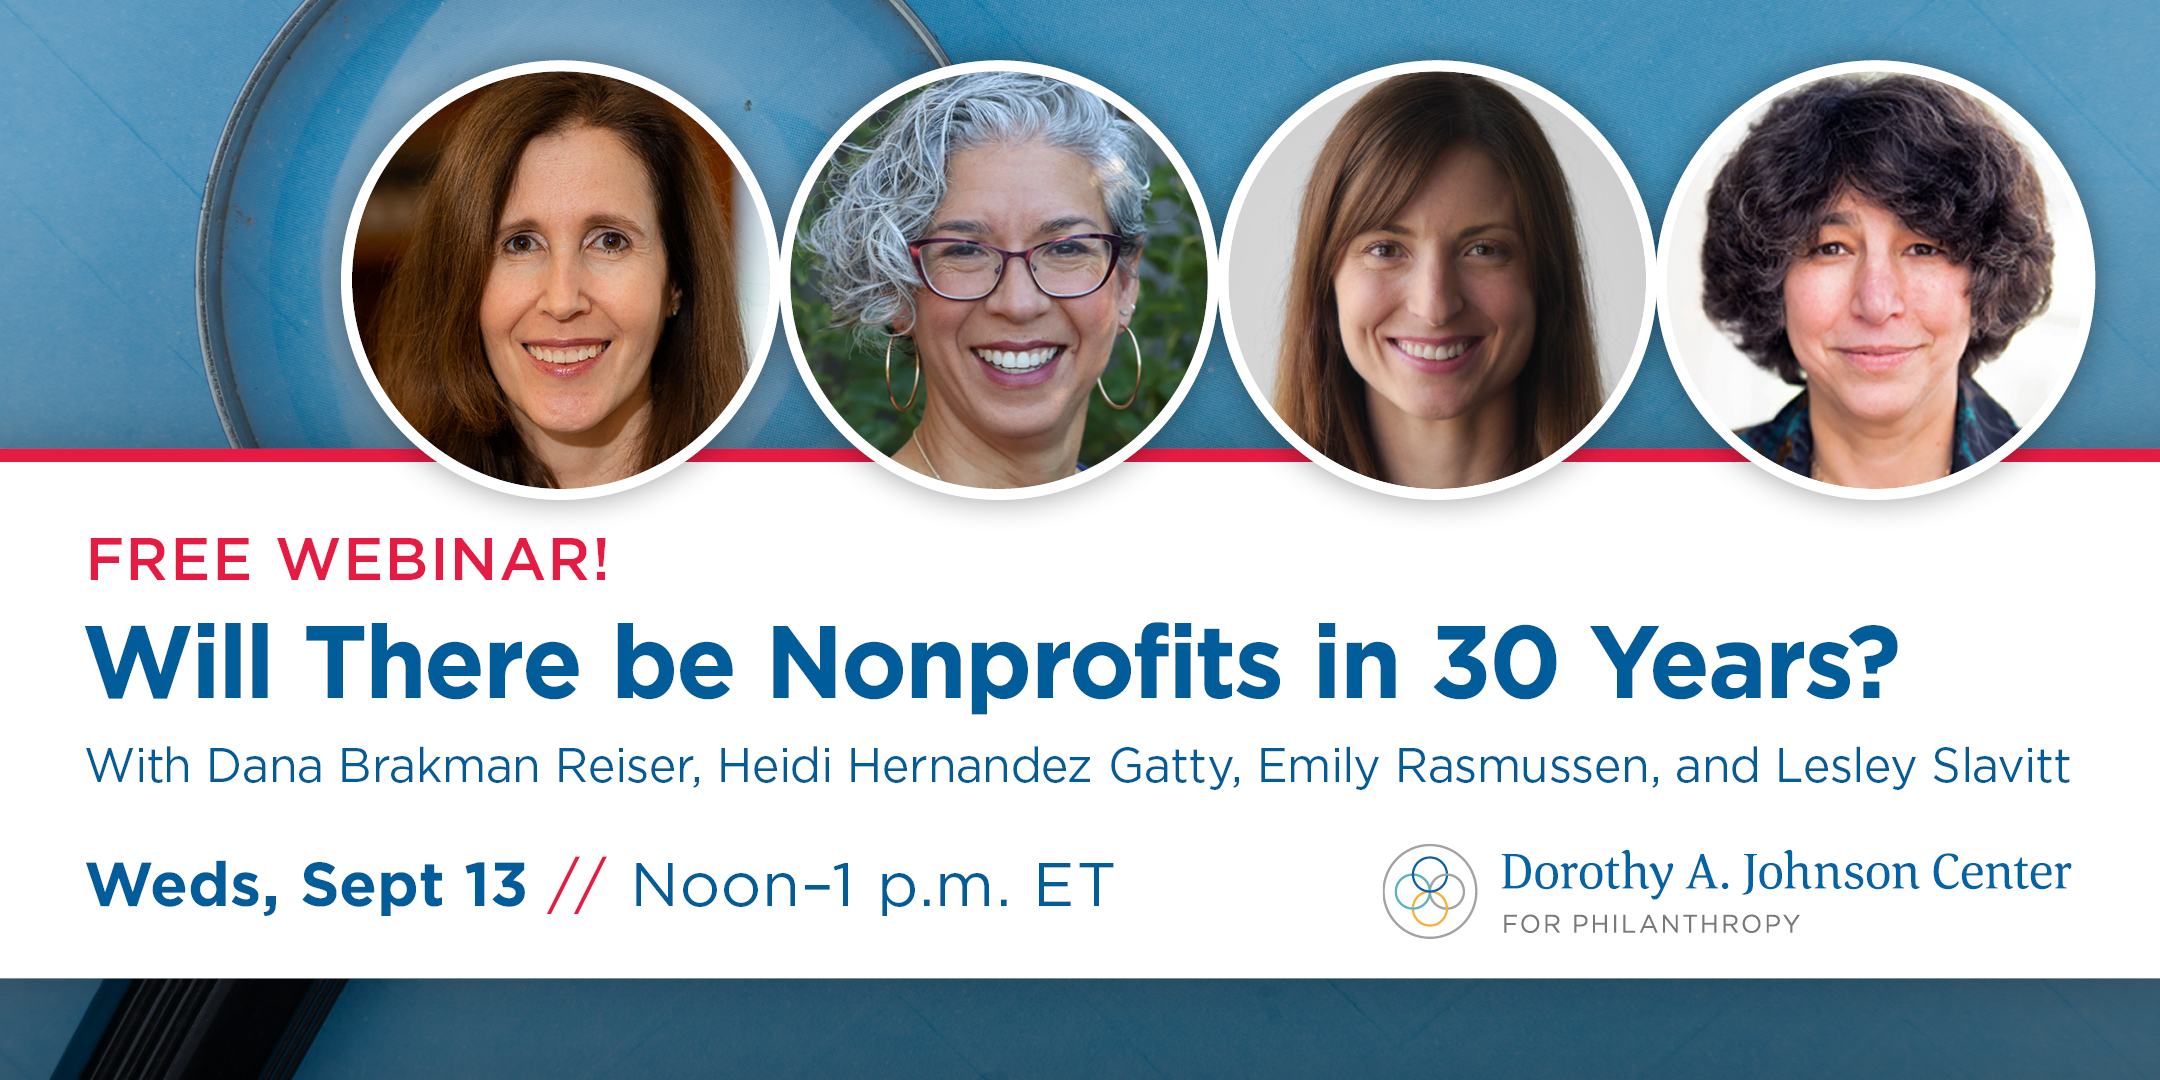 Free Webinar: Will There be Nonprofits in 30 Years?